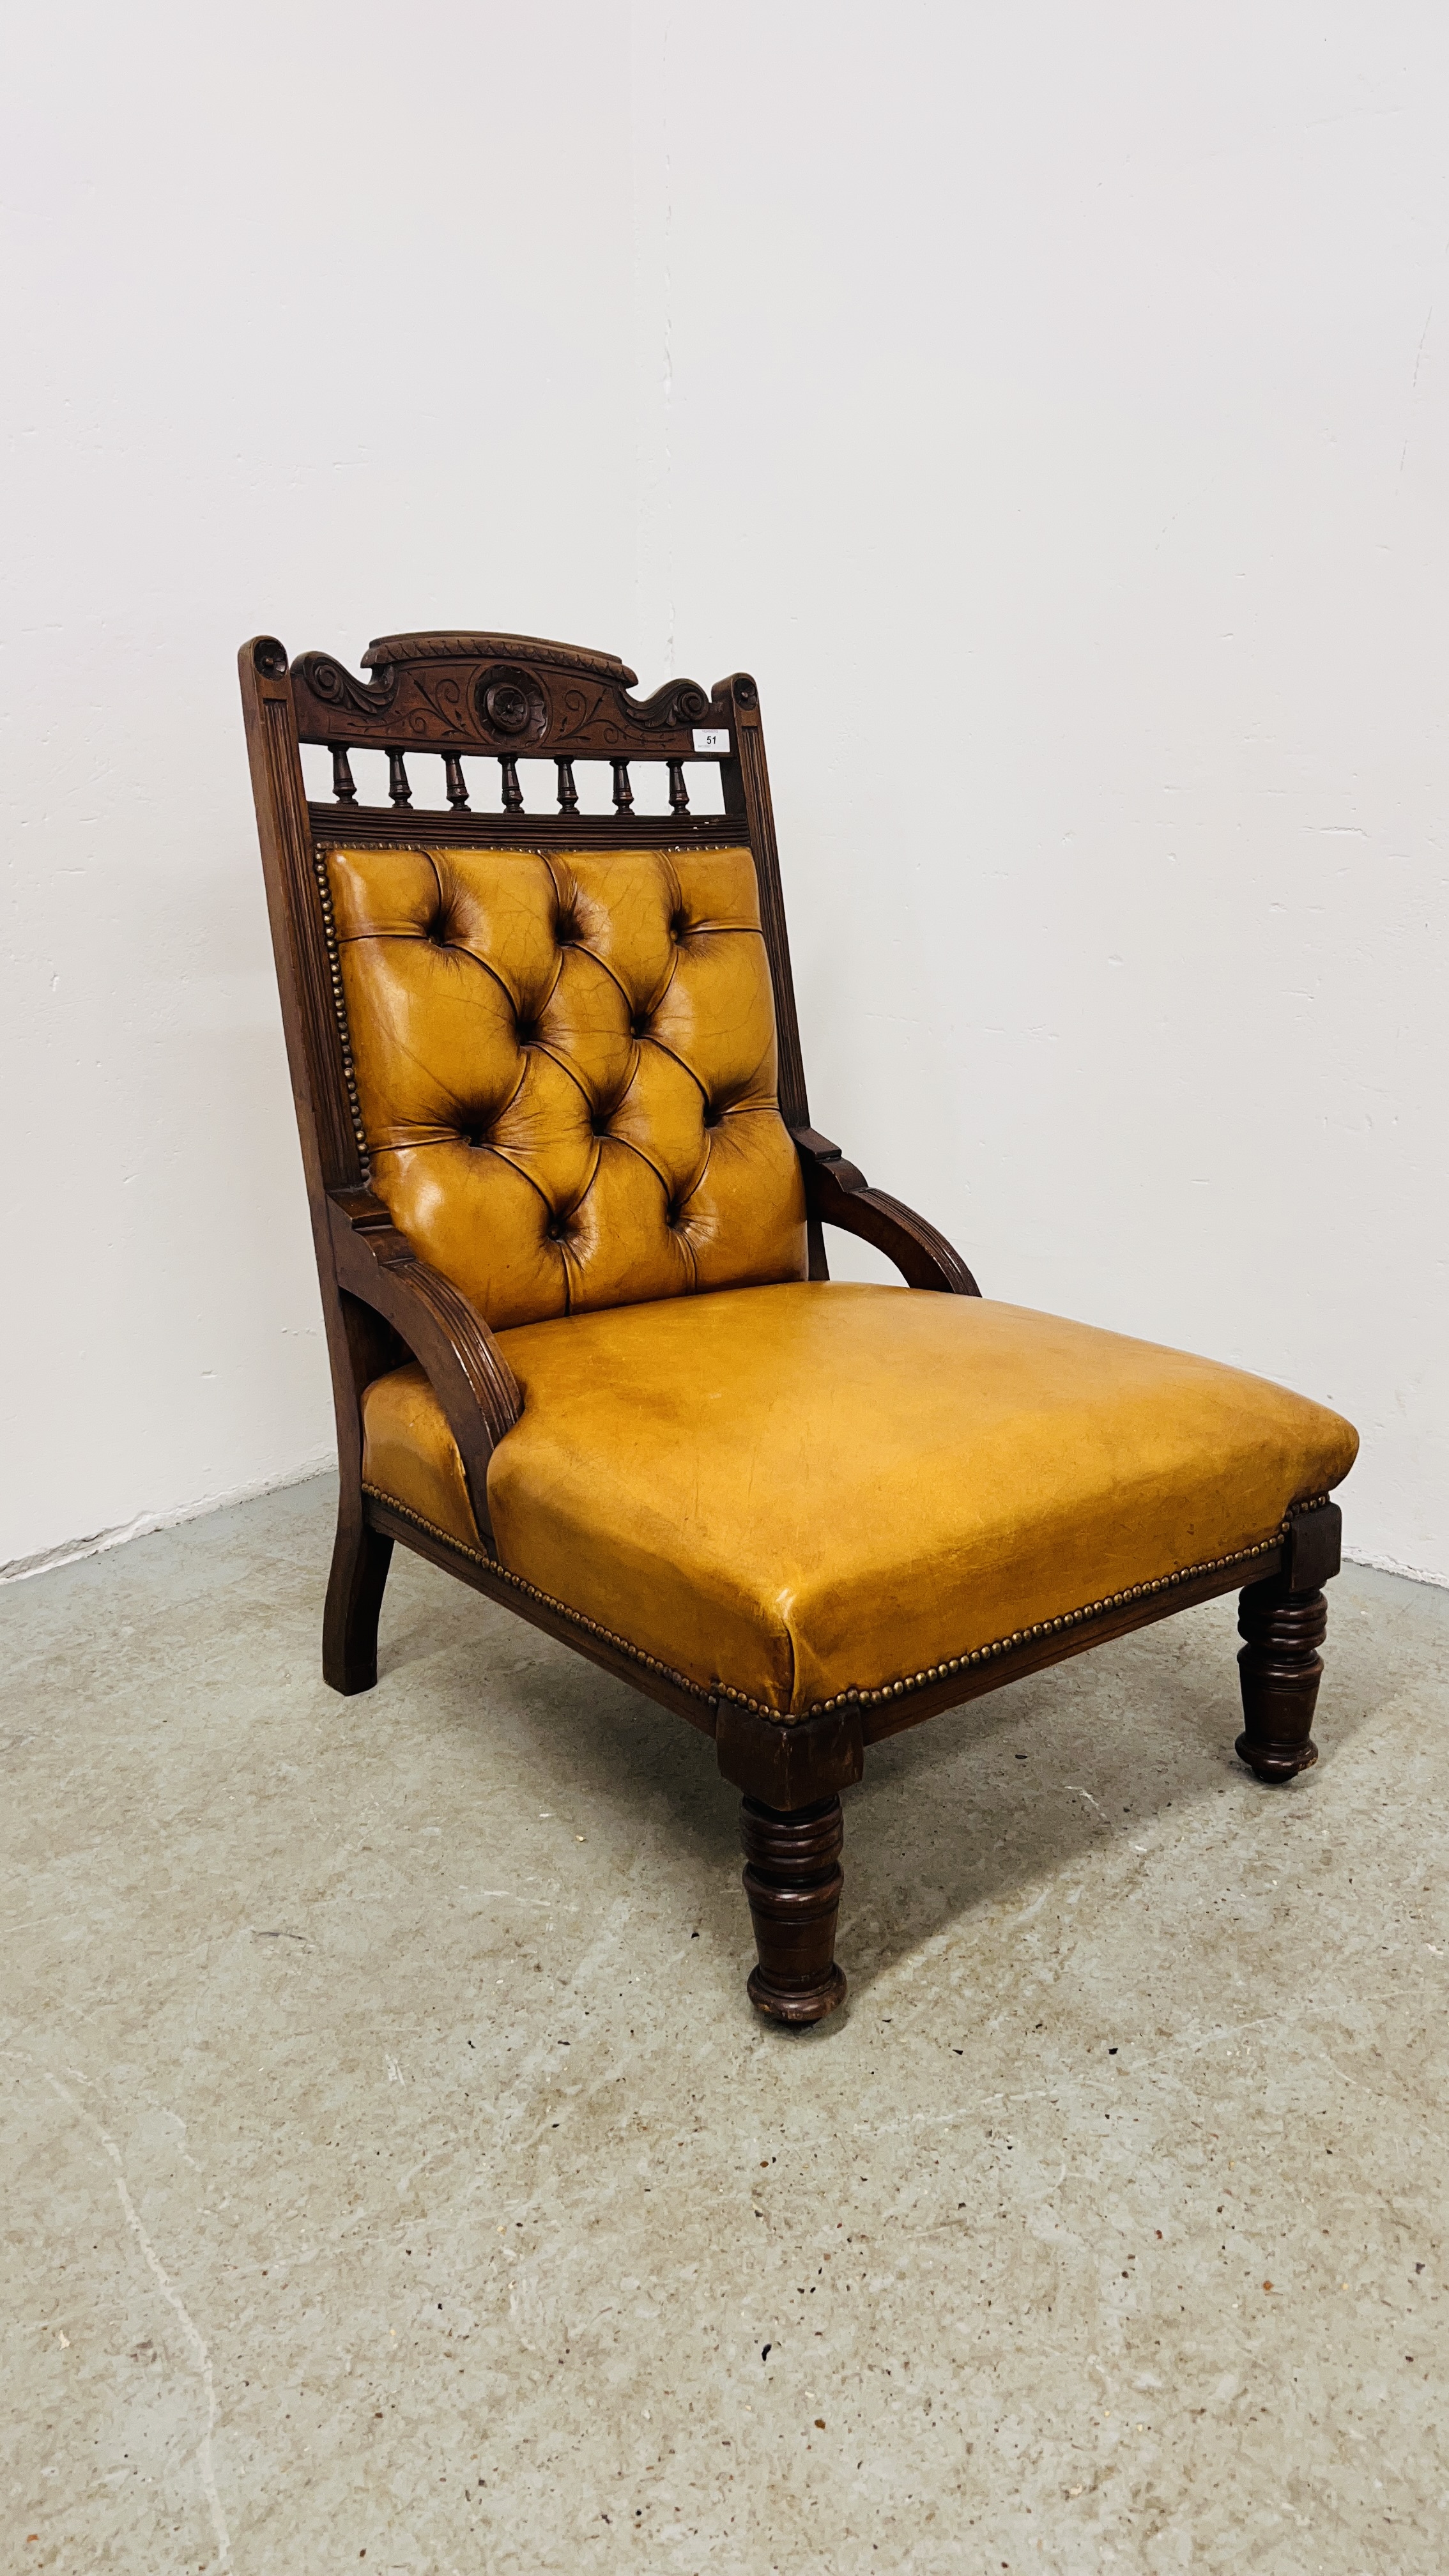 ANTIQUE EDWARDIAN MAHOGANY LOW CHAIR UPHOLSTERED IN TAN LEATHER - BUTTON BACK.